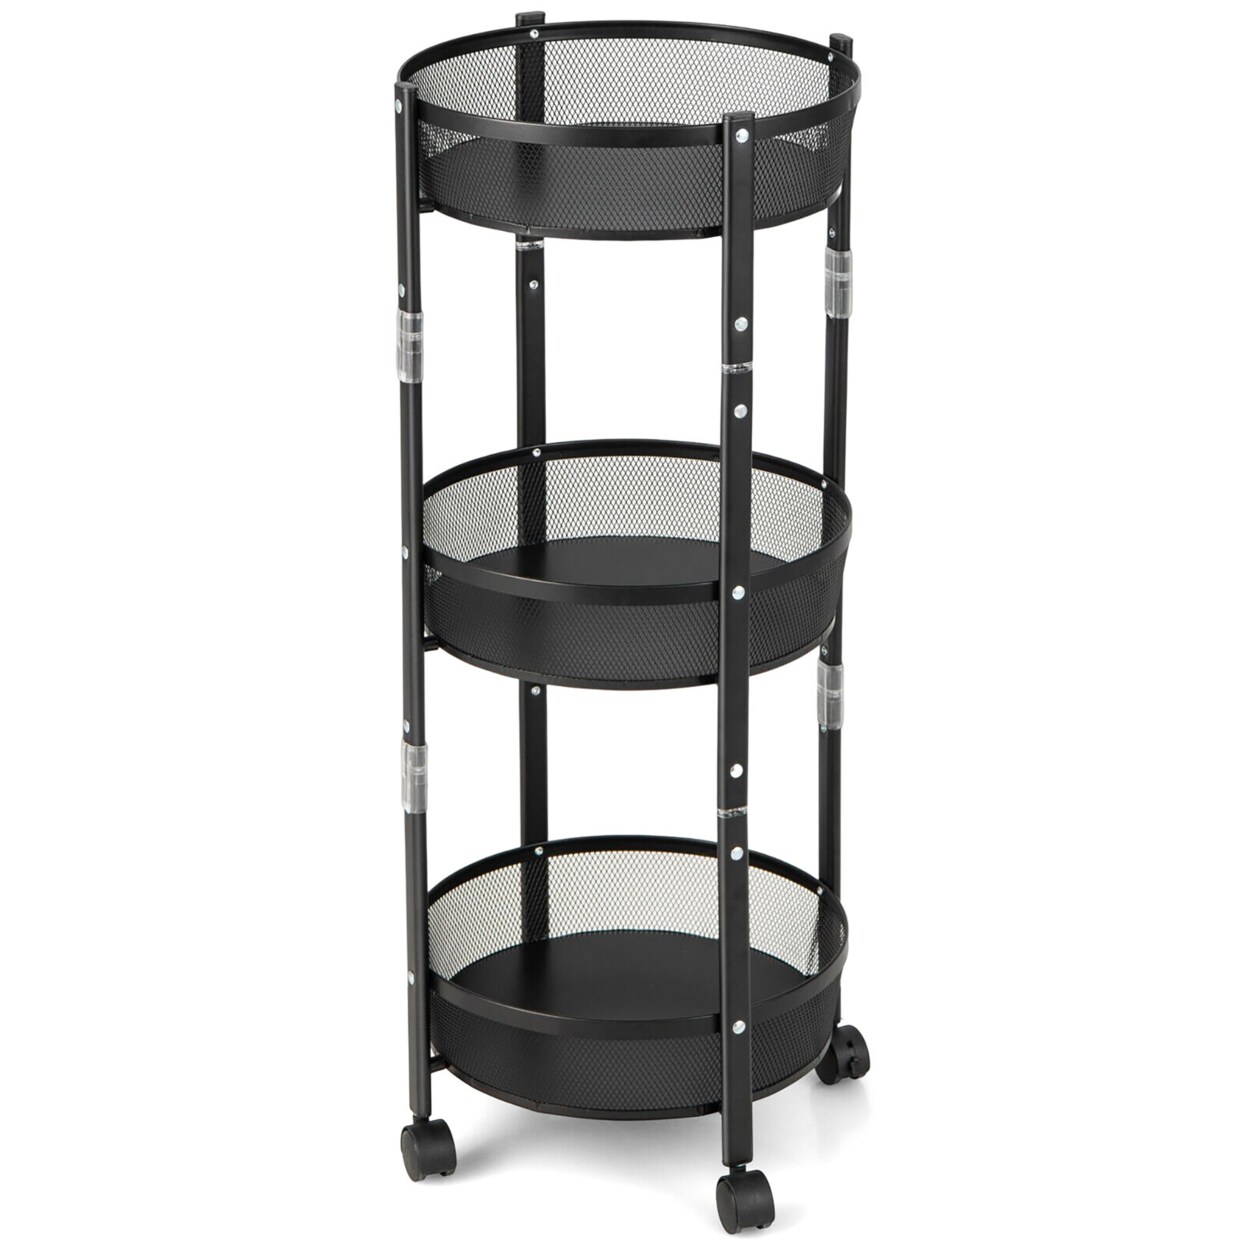 Gymax 3-Tier Rotating 1-Second folding Storage Rack Metal Rolling Utility Cart Round